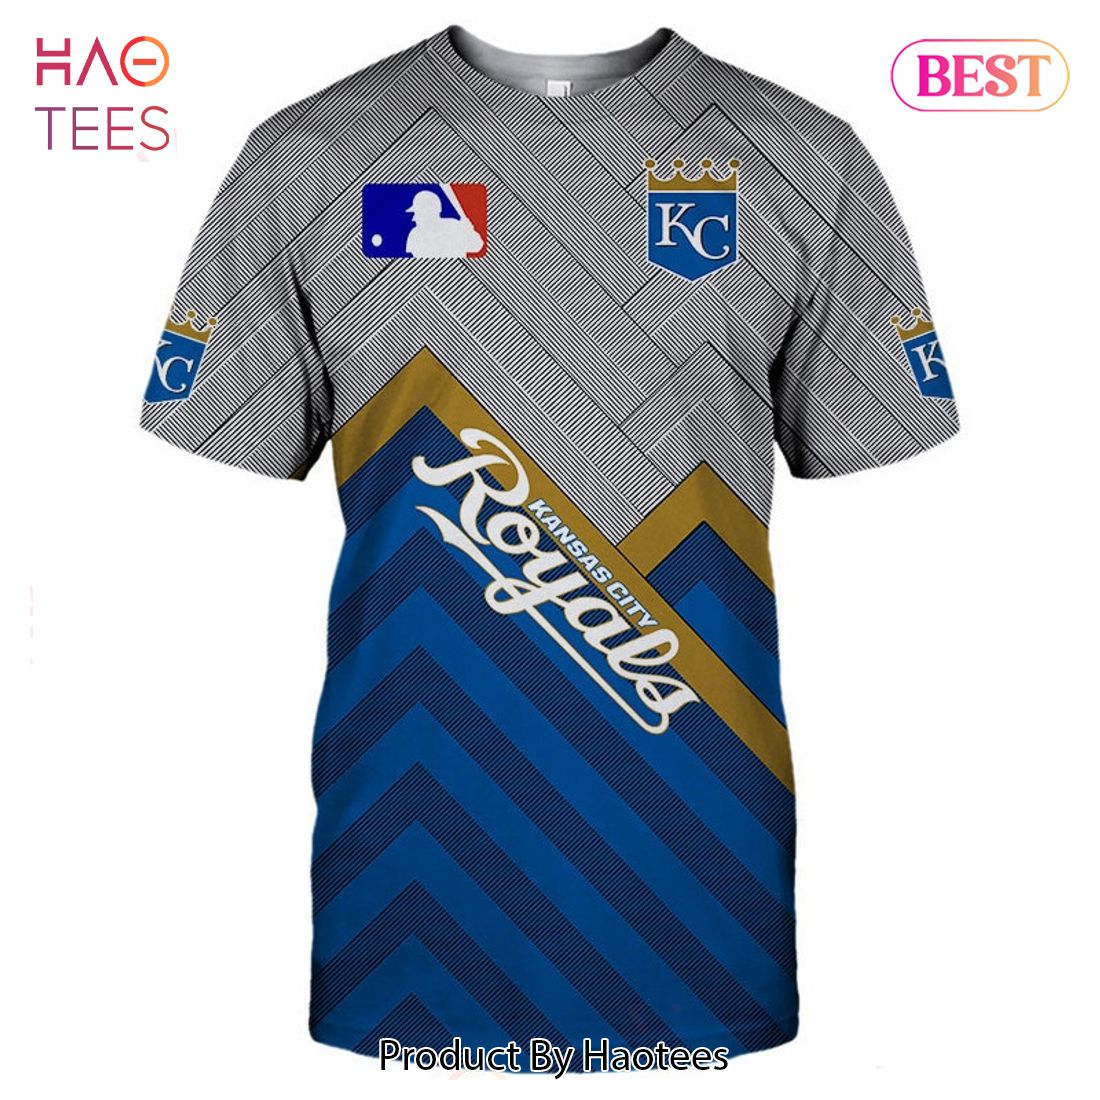 new royals jersey